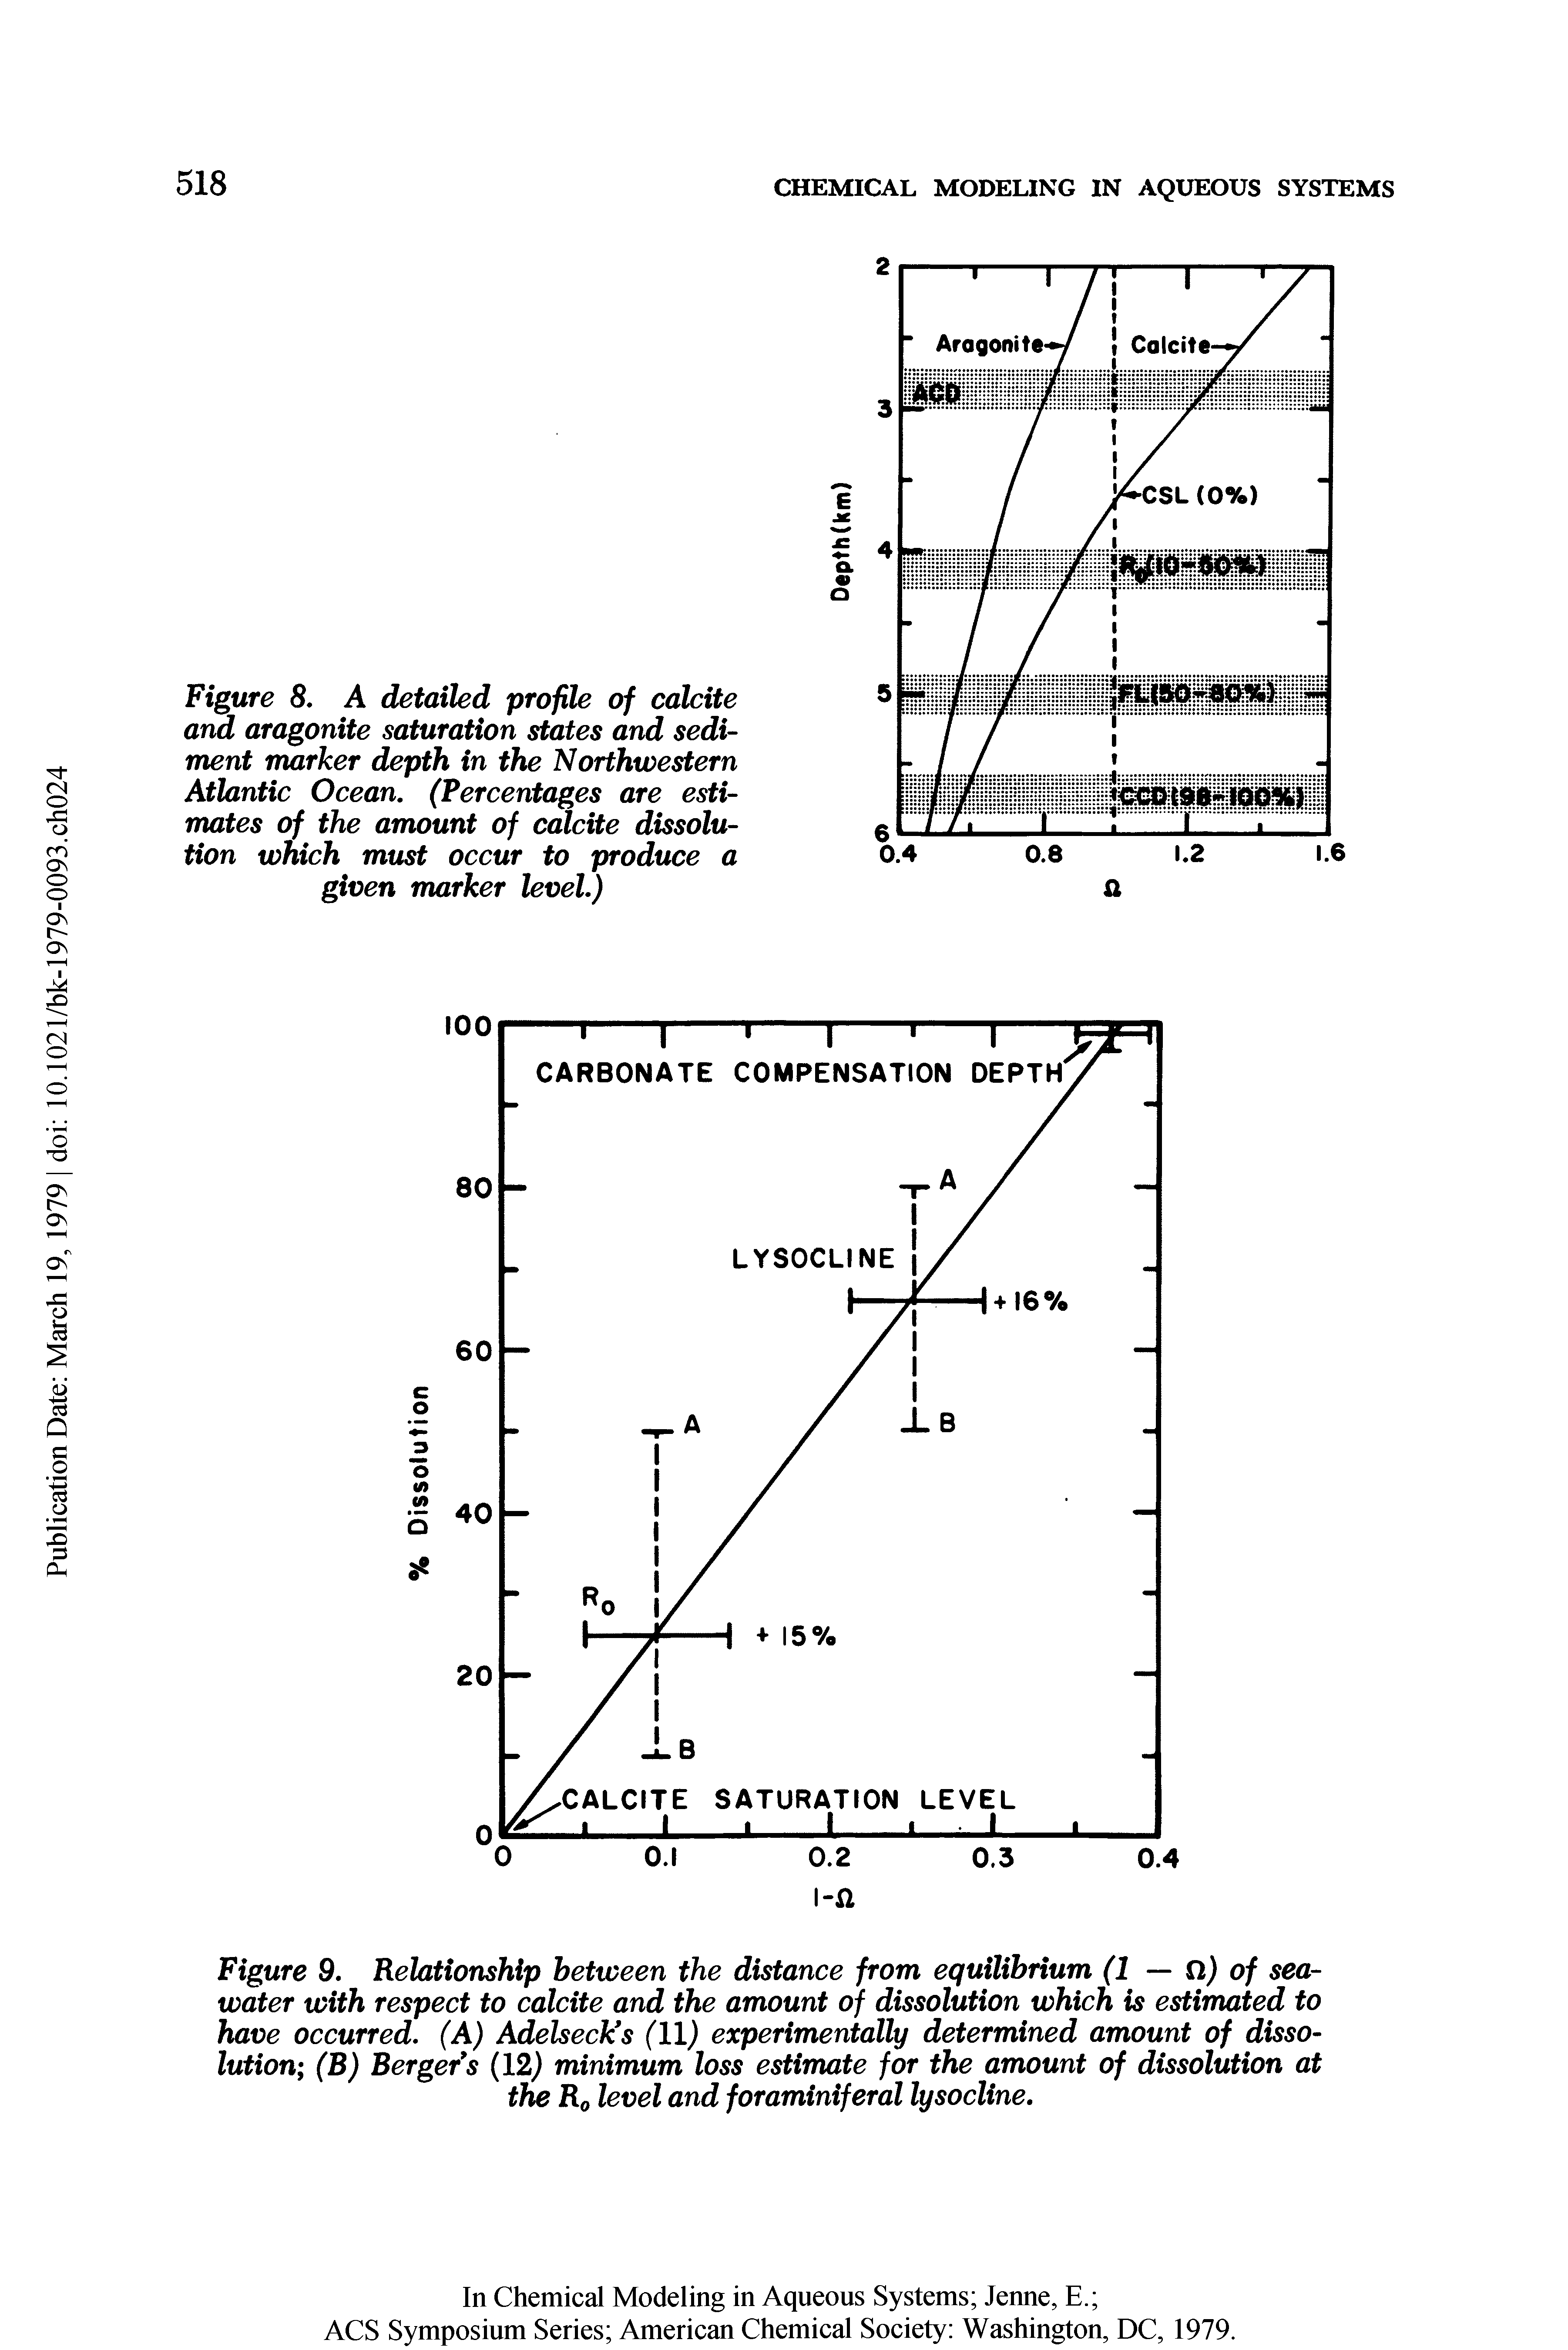 Figure 9. Relationship between the distance from equilibrium (1 — Q) of seawater with respect to calcite and the amount of dissolution which is estimated to have occurred. (A) Adelseck s (11) experimentally determined amount of dissolution (B) Berger s (12) minimum loss estimate for the amount of dissolution at the Ro level and foraminiferal lysocline.